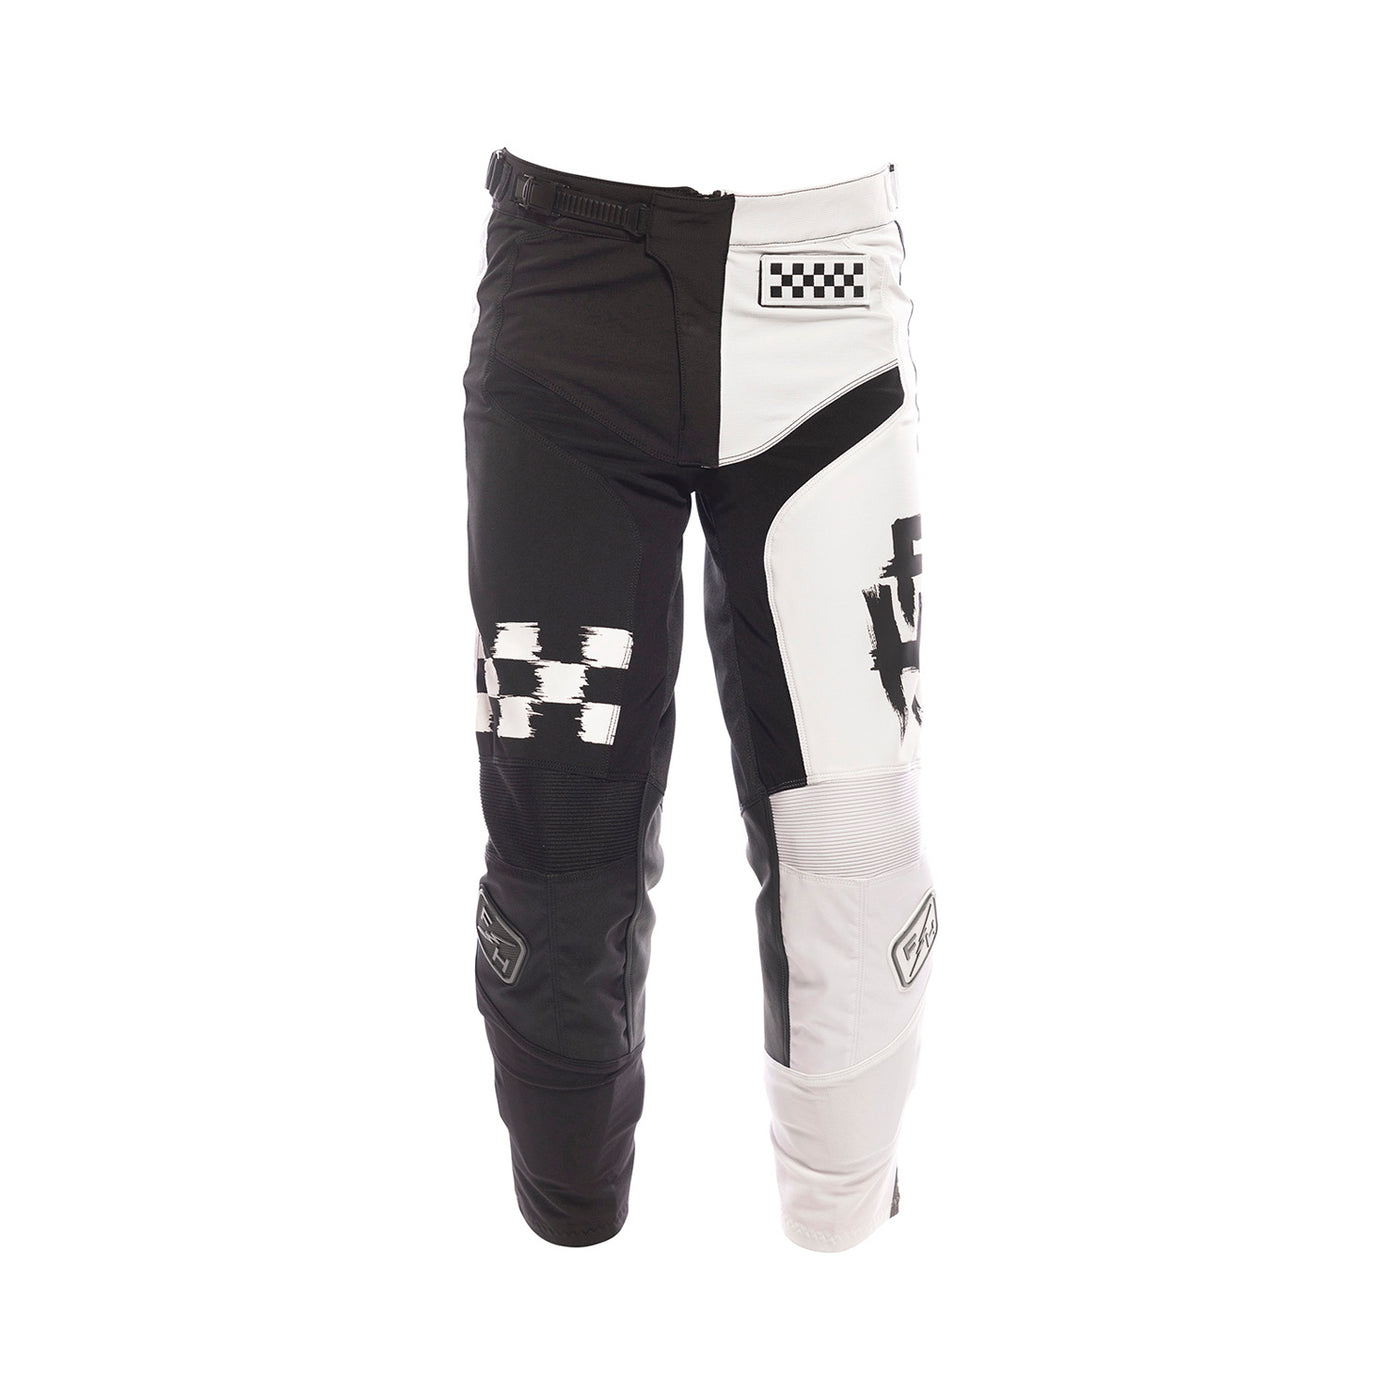 Fasthouse Youth Speed Style Jester Pant